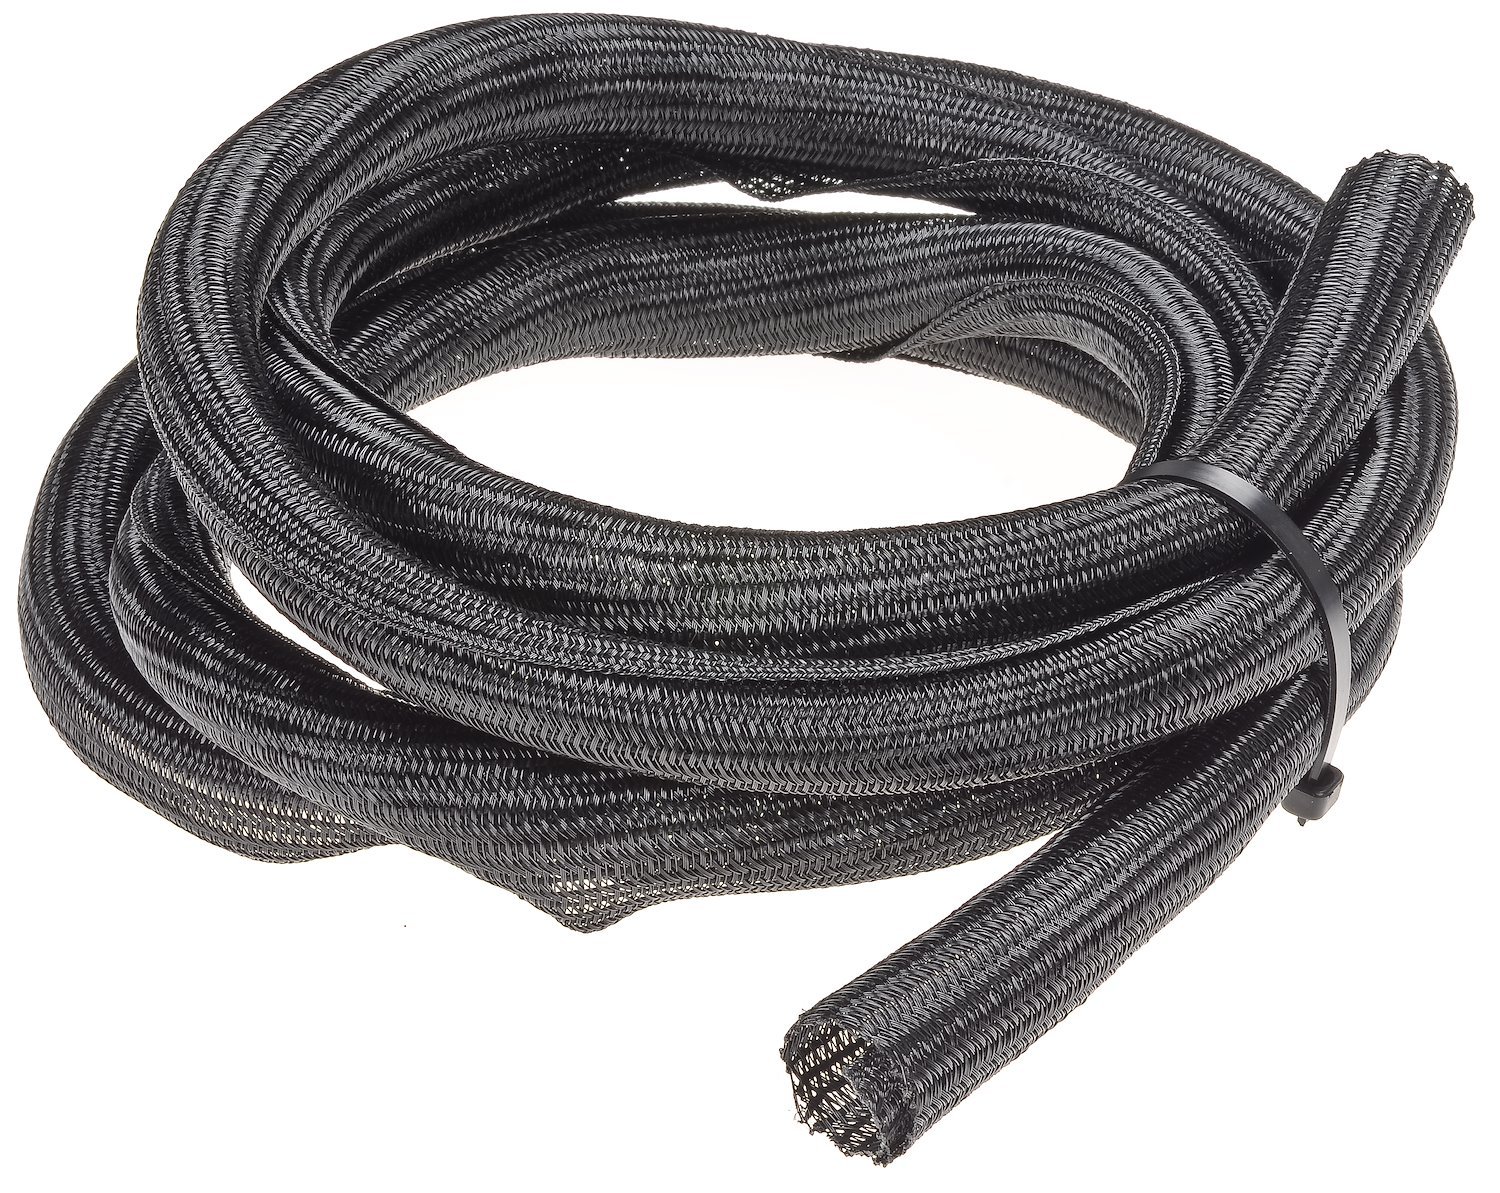 Ron Francis Wiring BS-50 Flexible Braided Wire Covering 1/2 in. Diameter 10 ft.